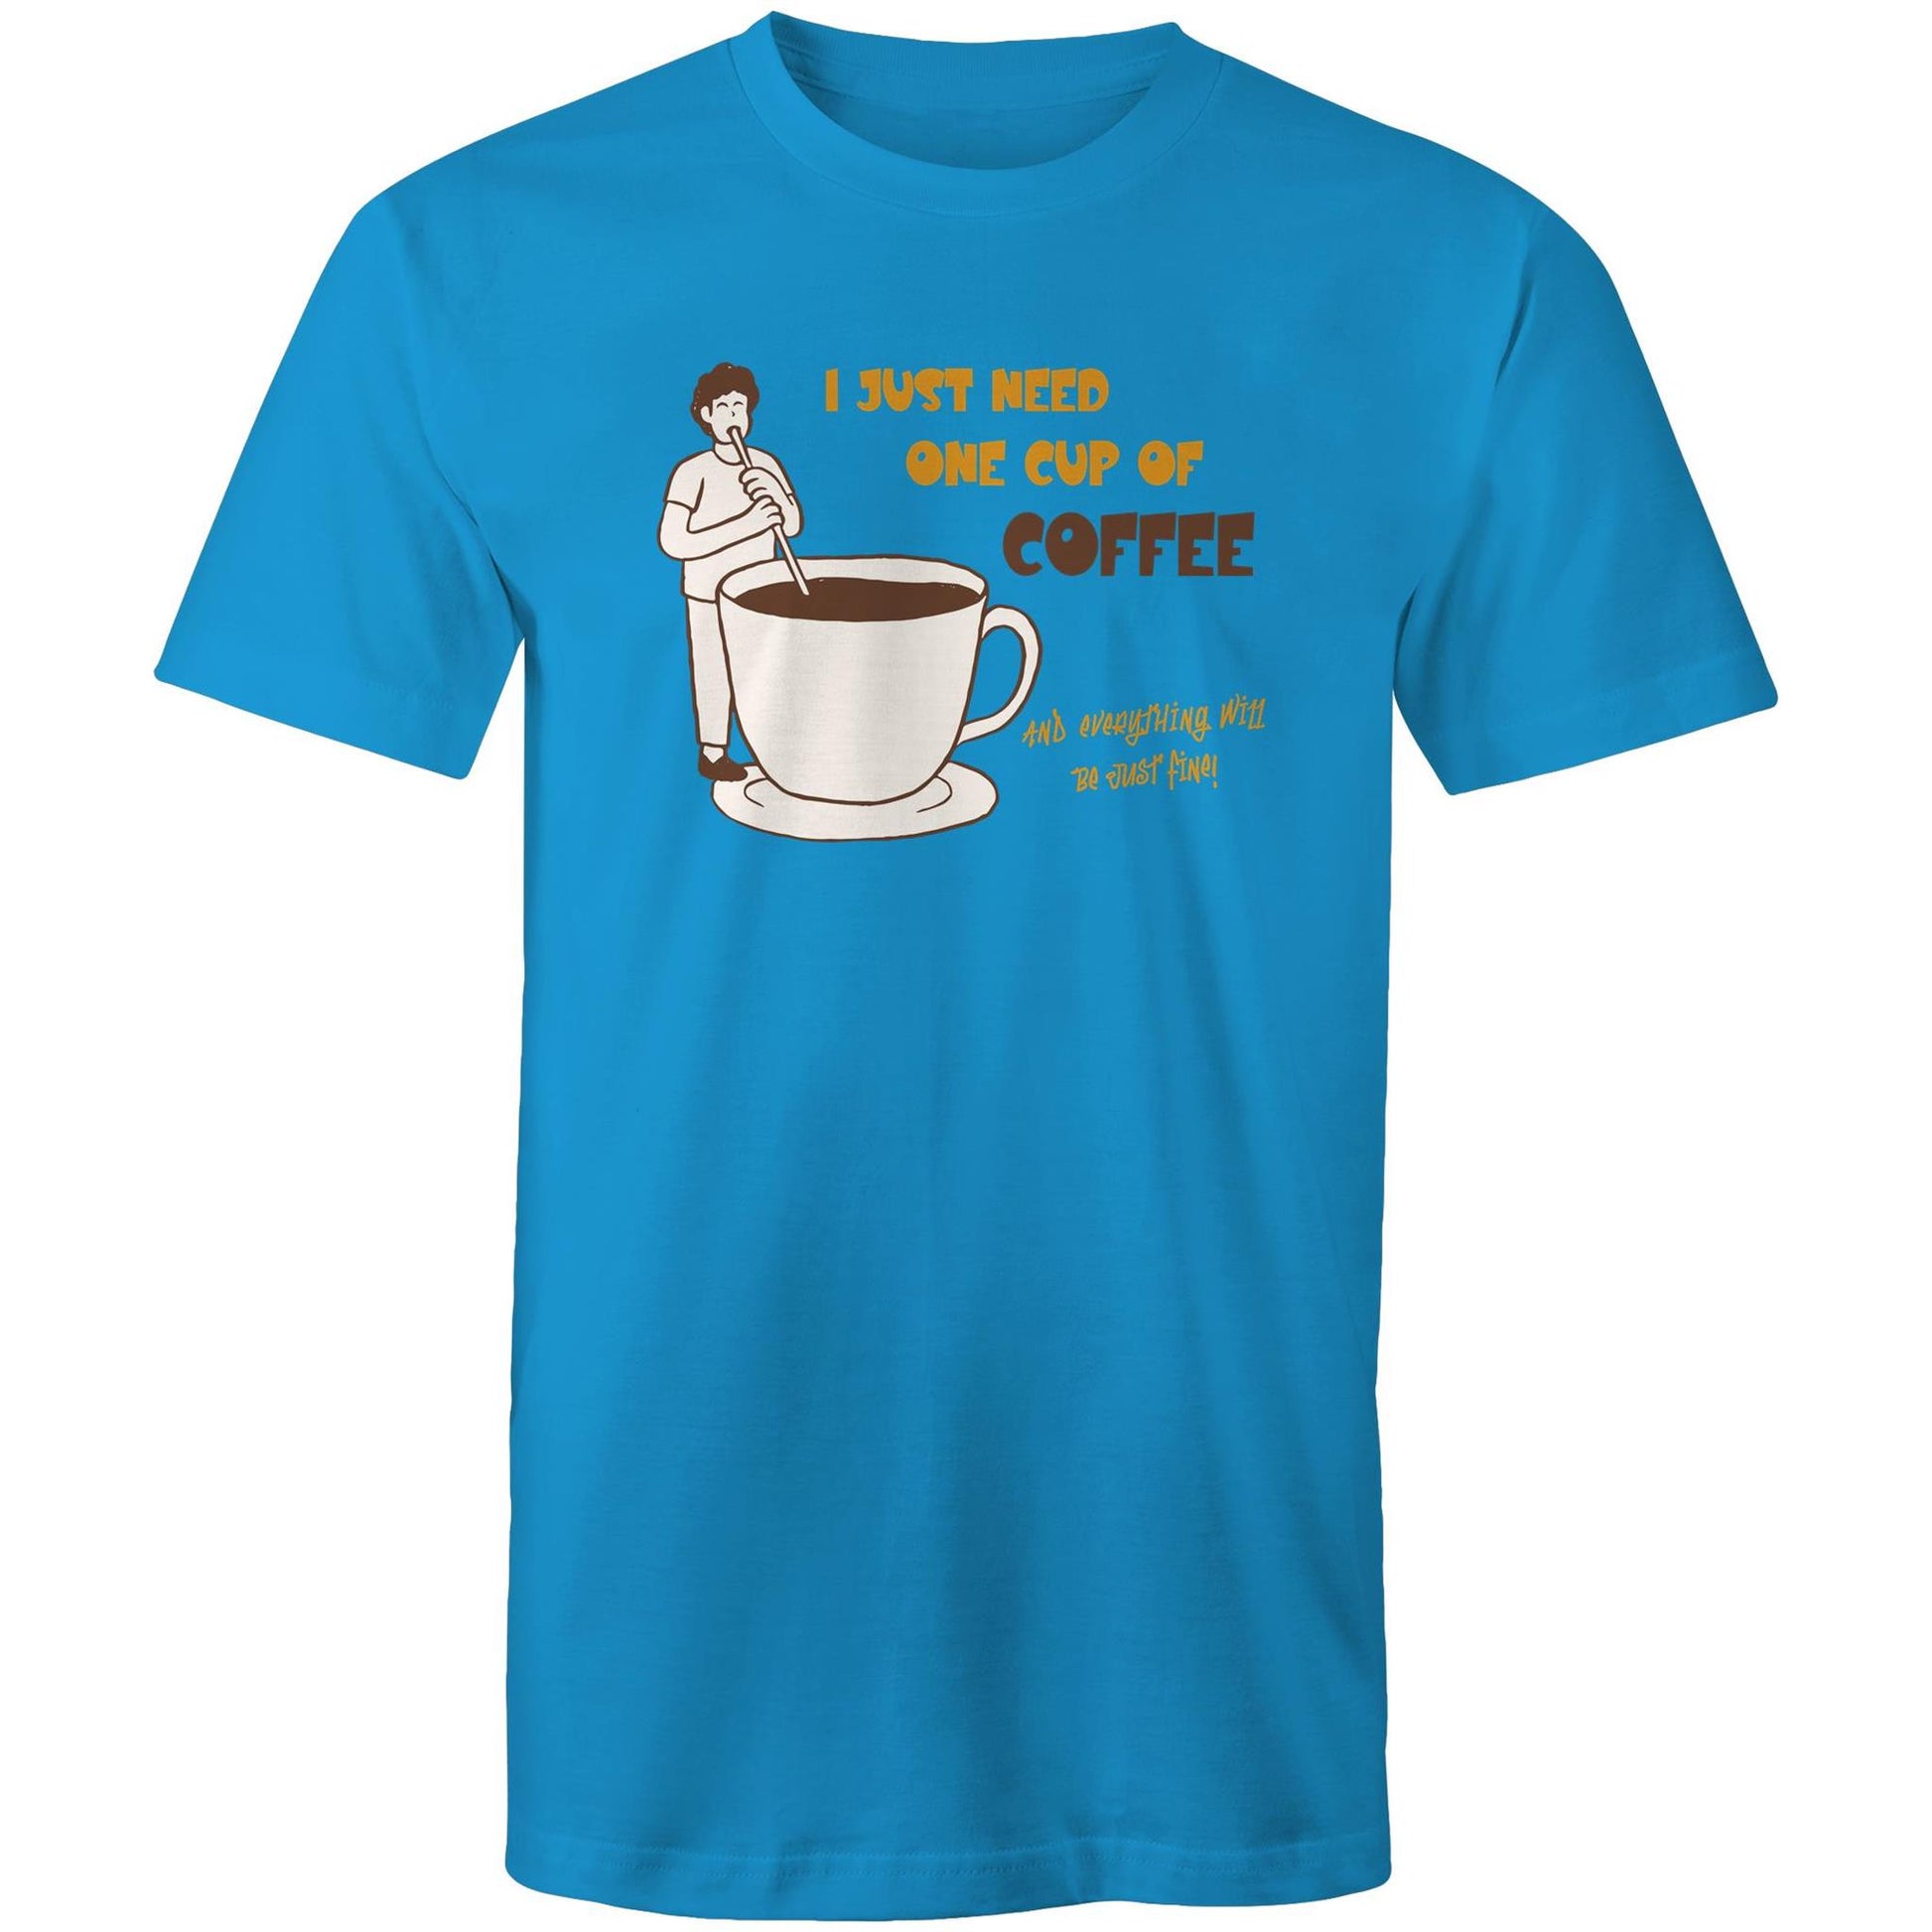 I Just Need One Cup Of Coffee And Everything Will Be Just Fine - Mens T-Shirt Arctic Blue Mens T-shirt Coffee